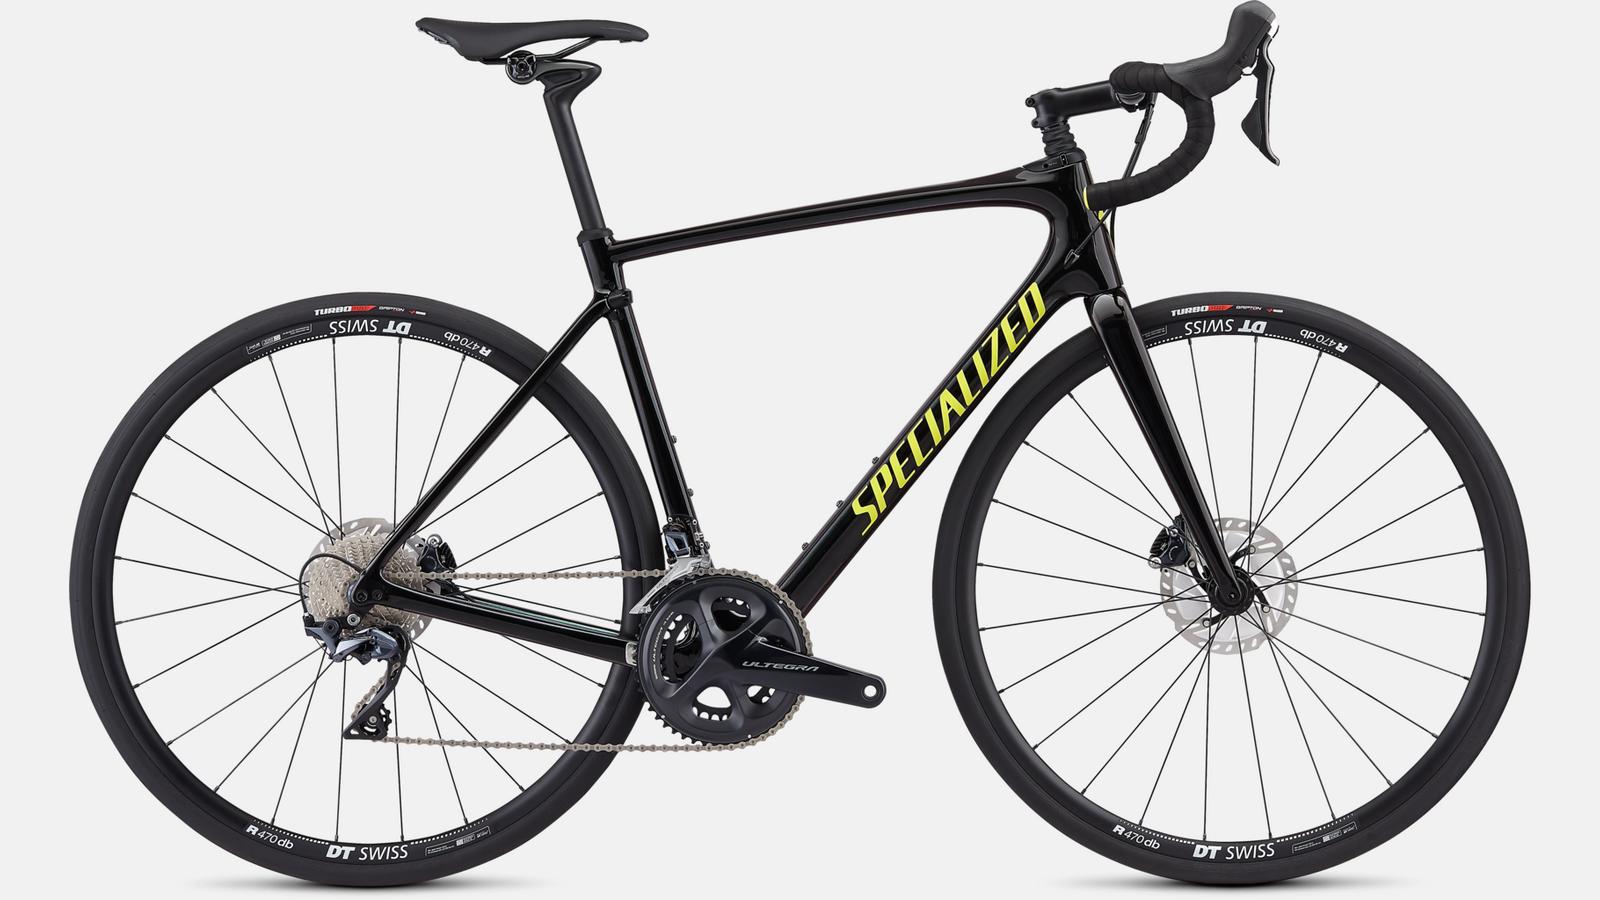 Paint for 2019 Specialized Roubaix Comp - Gloss Tarmac Black